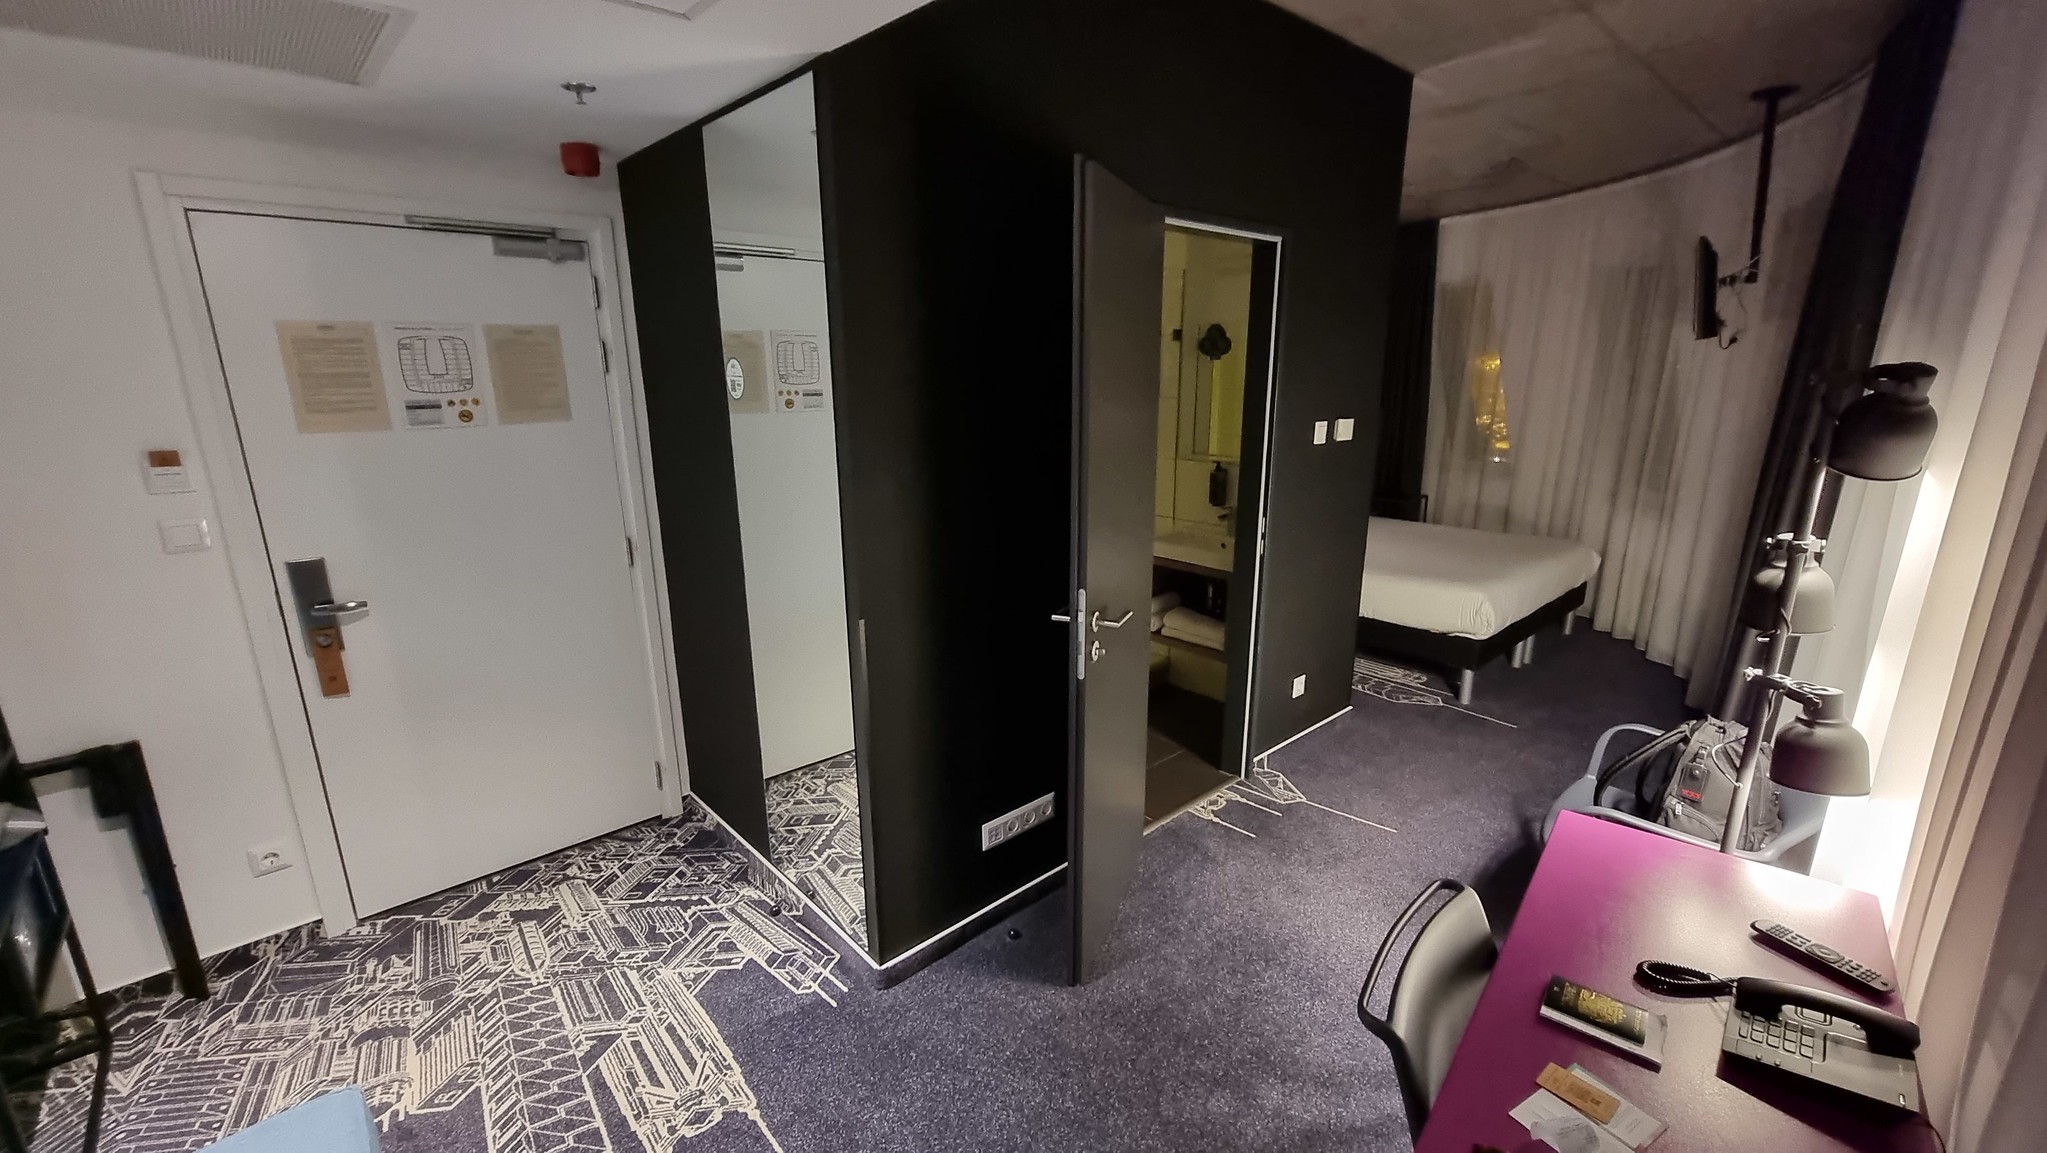 Room 304 at the Ibis Styles hotel at Budapest Airport